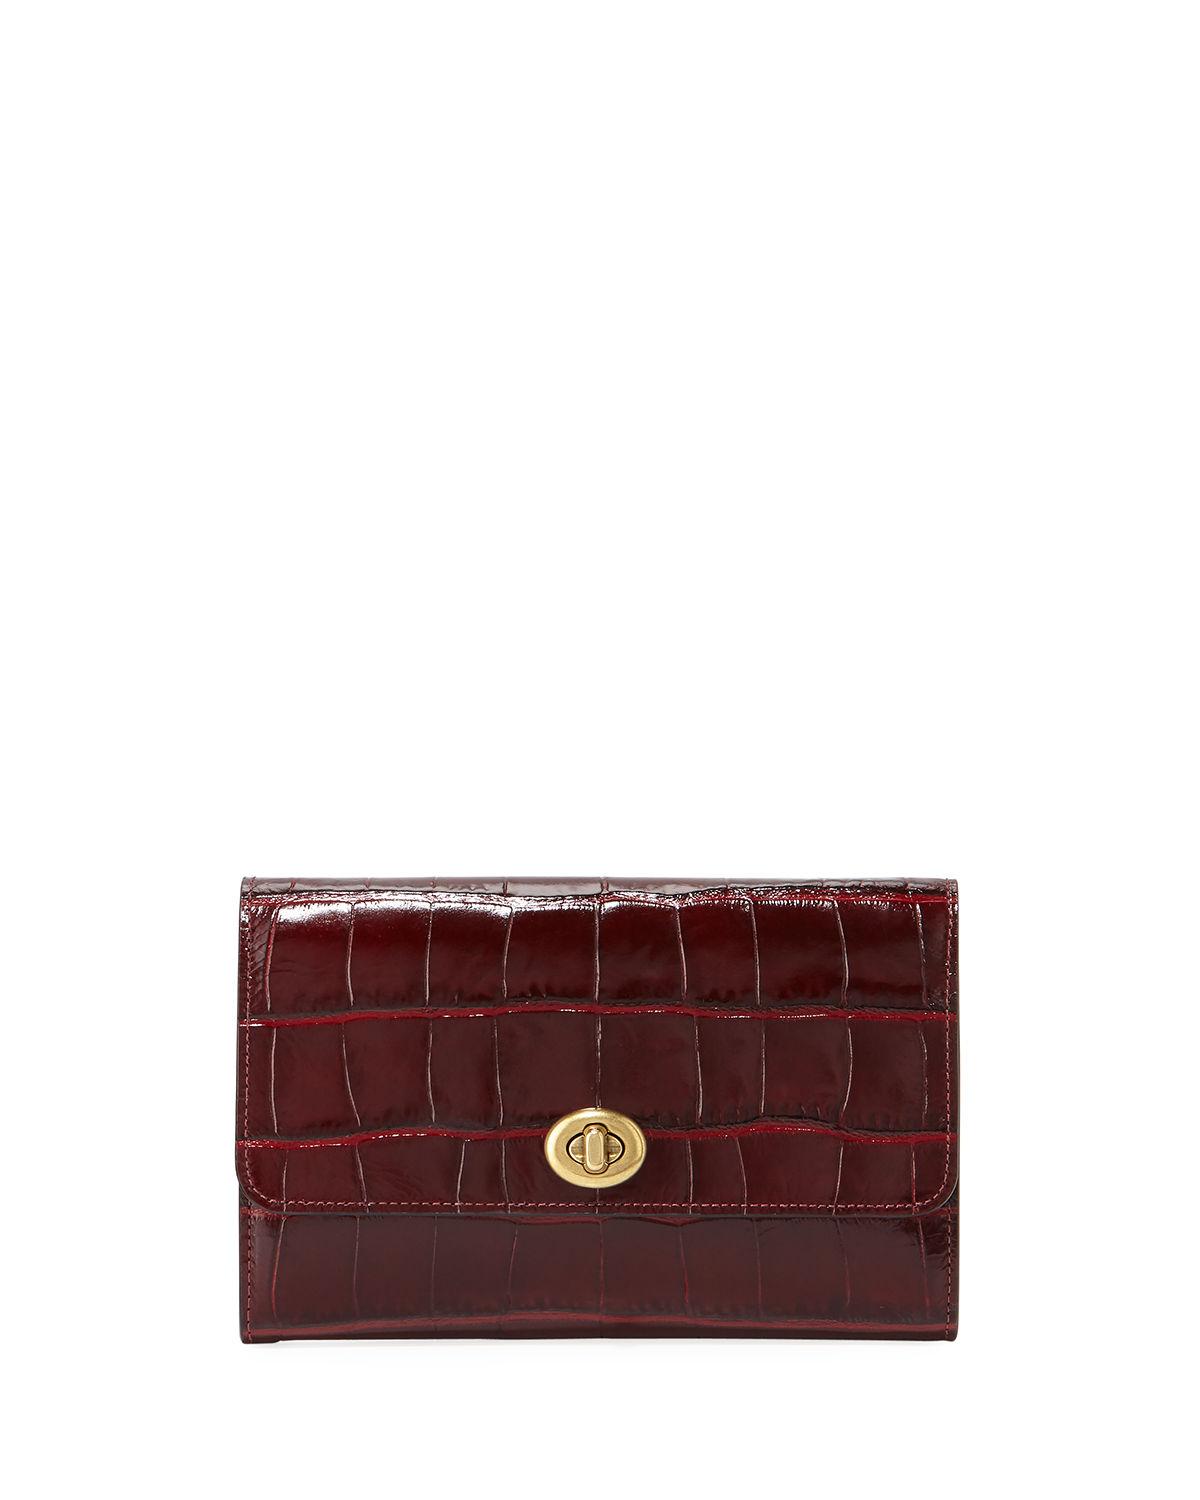 Lyst - COACH Croc-embossed Turnlock Chain Crossbody Bag in Red